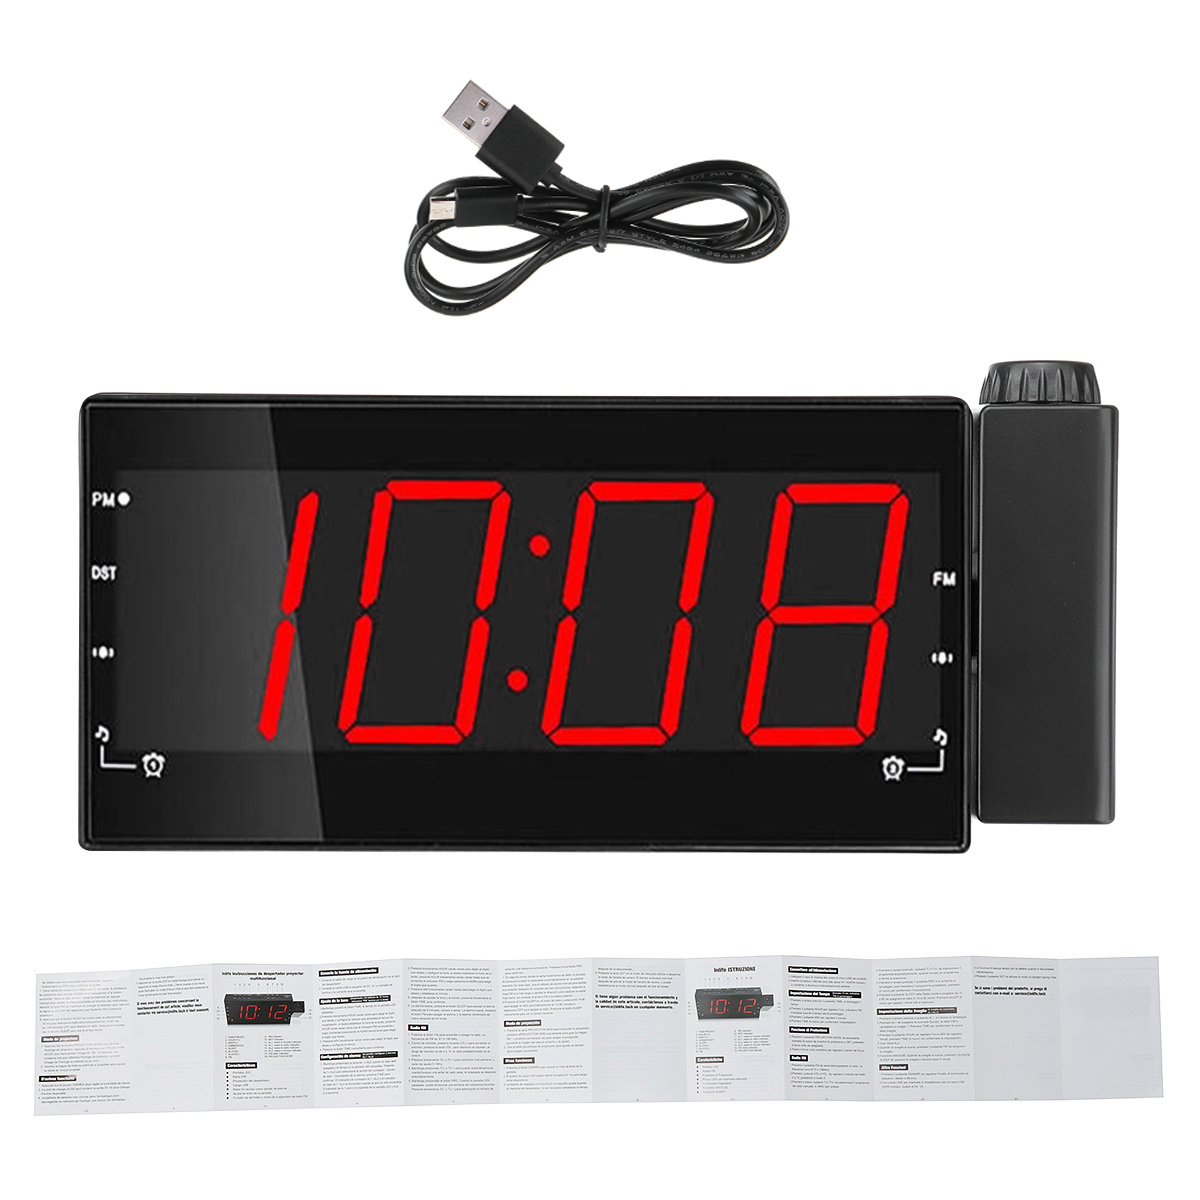 

DC 5V 1A Digital LED Projector Dimmer Time Projection FM Radio Snooze Dual Alarm Clock